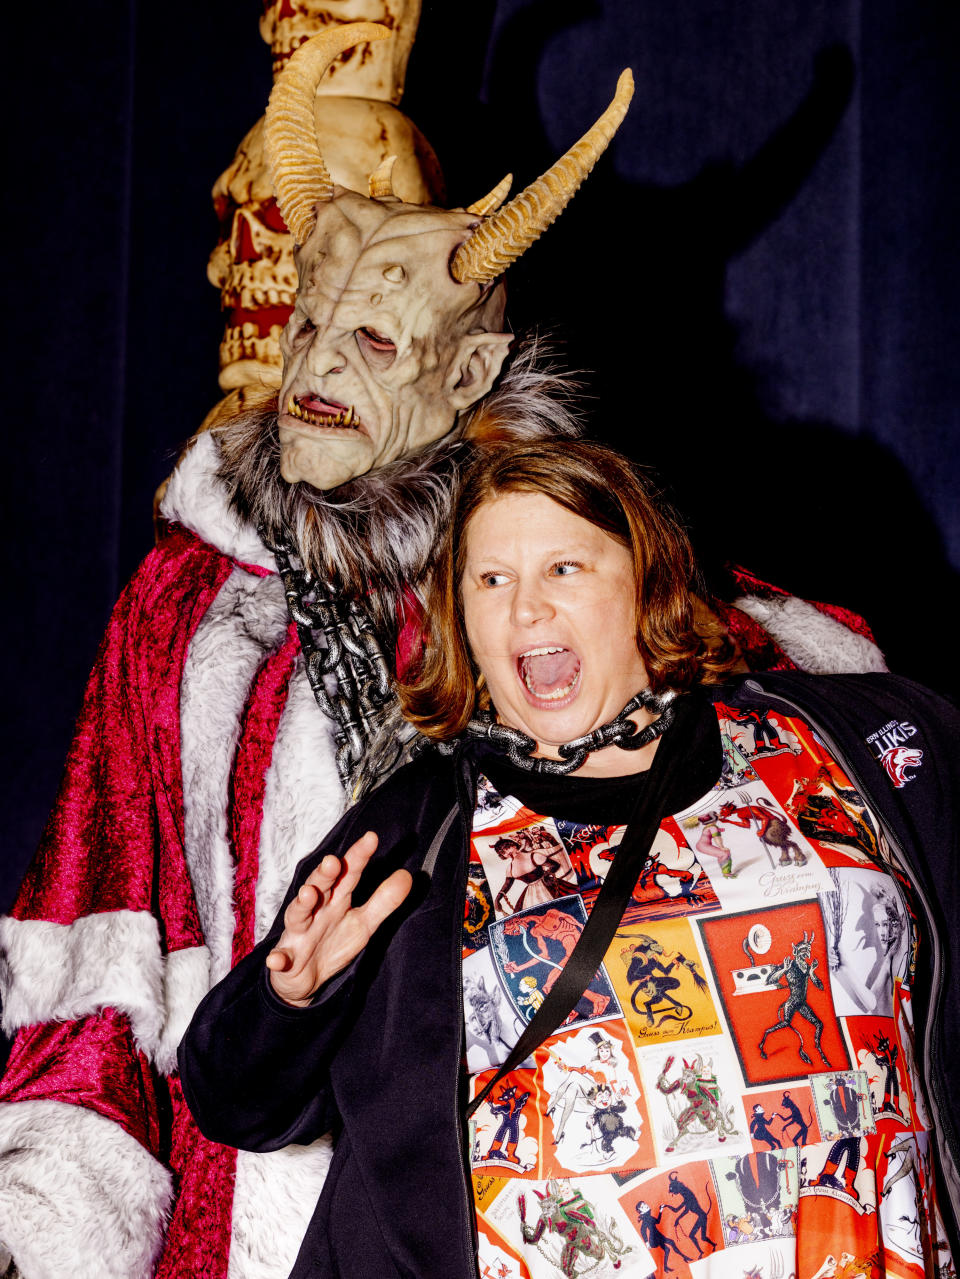 Kelly Cusion gets a photo with Krampus at "A Christmas to Dismember." 